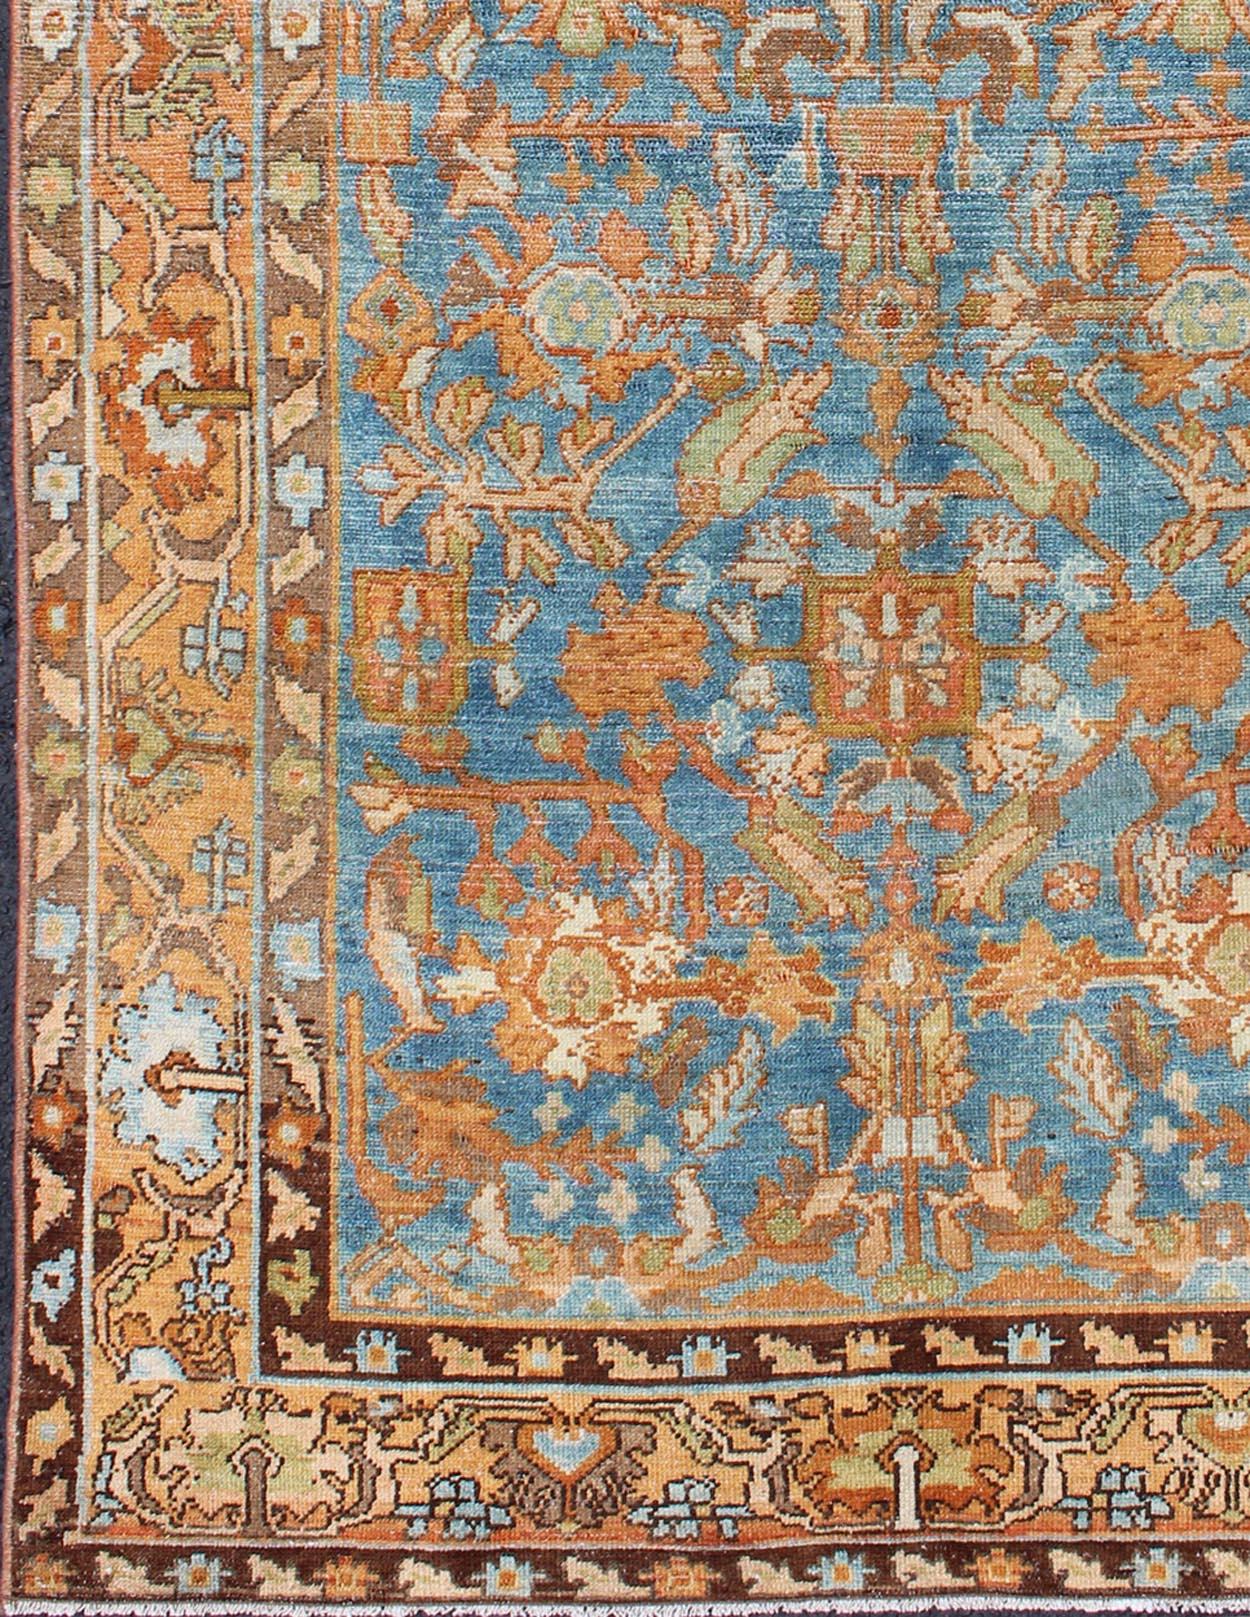 Botanical design Persian Malayer antique rug in blue, rust, and orange tones, rug sus-1807-238, country of origin / type: Iran / Malayer, circa 1920.

This beautiful antique early 20th century Persian Malayer carpet features a beautiful all-over